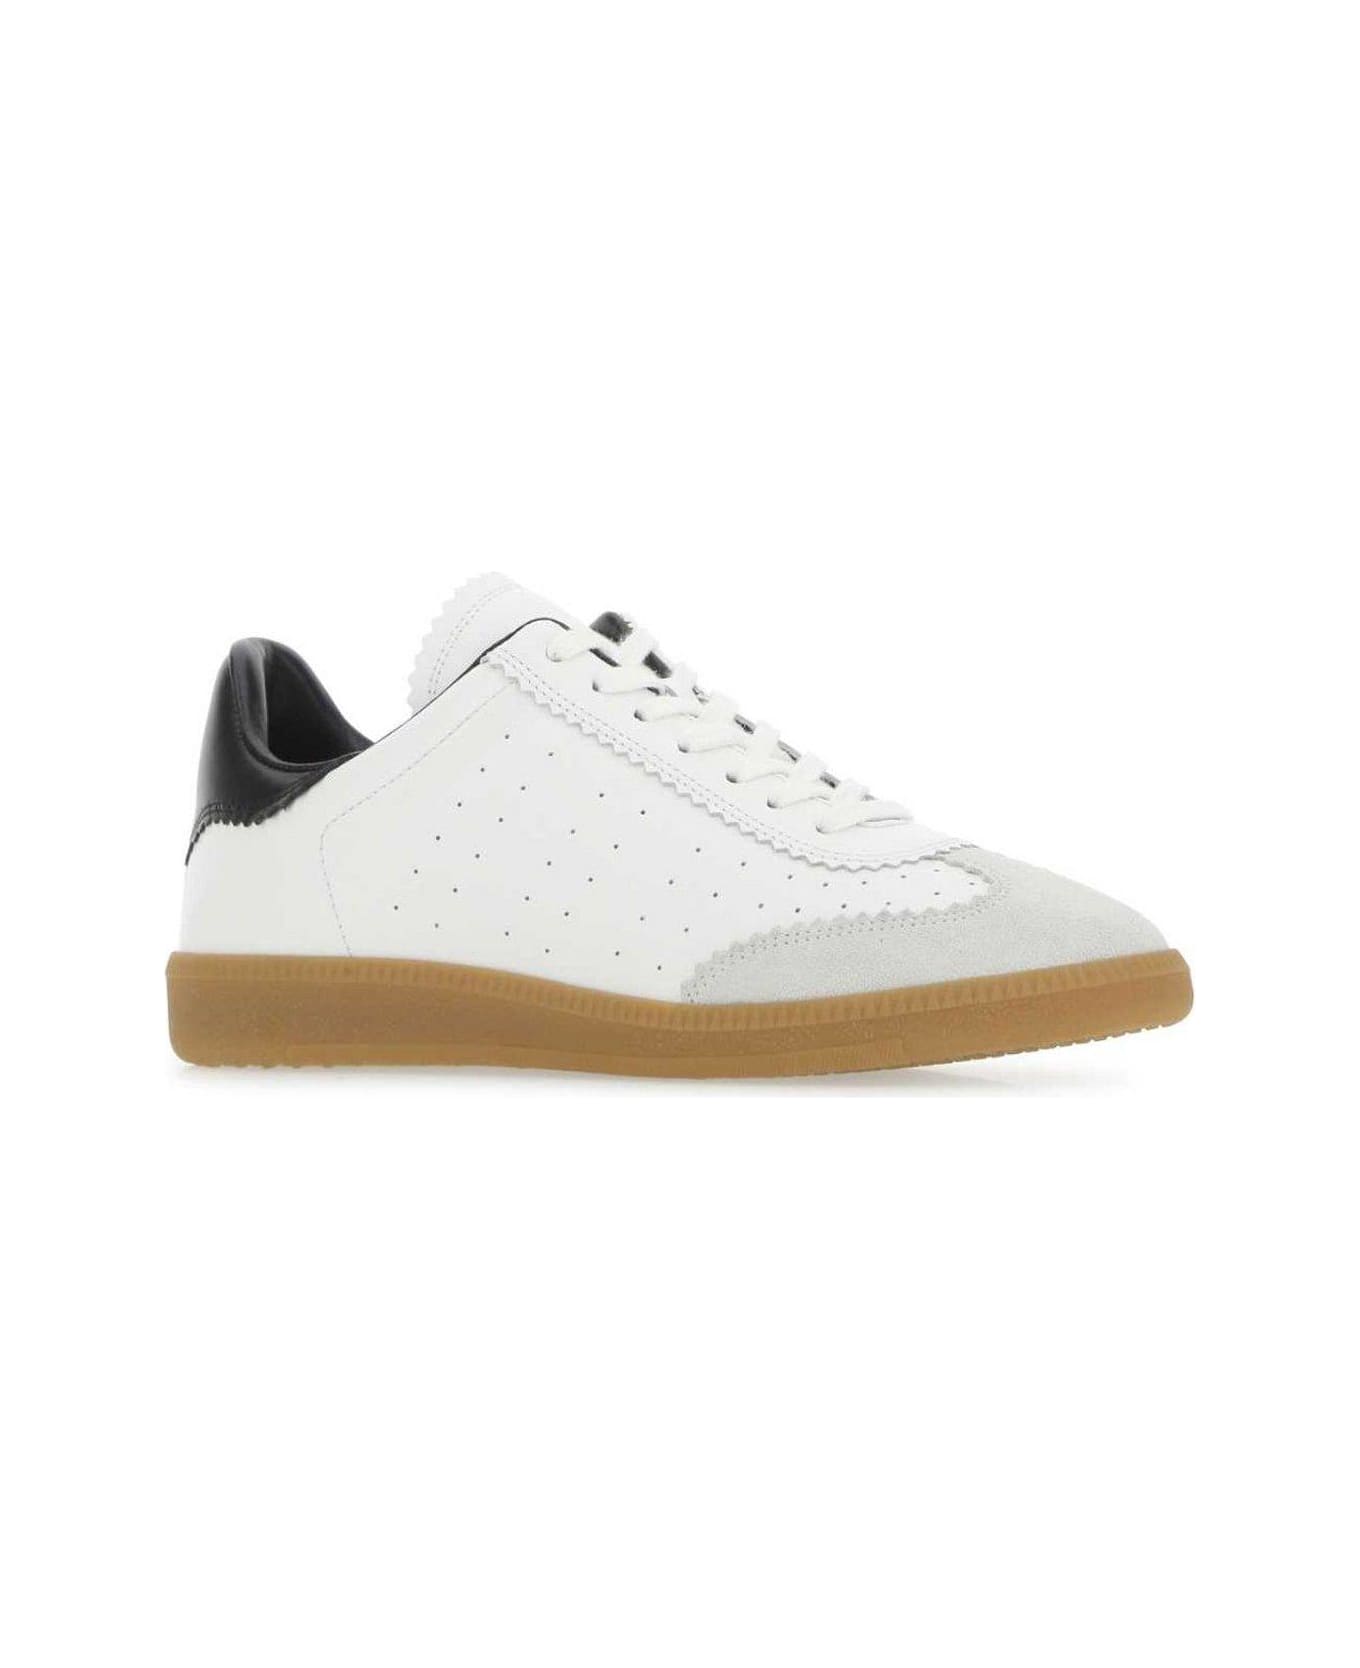 Isabel Marant Round Toe Lace-up Sneakers - White スニーカー